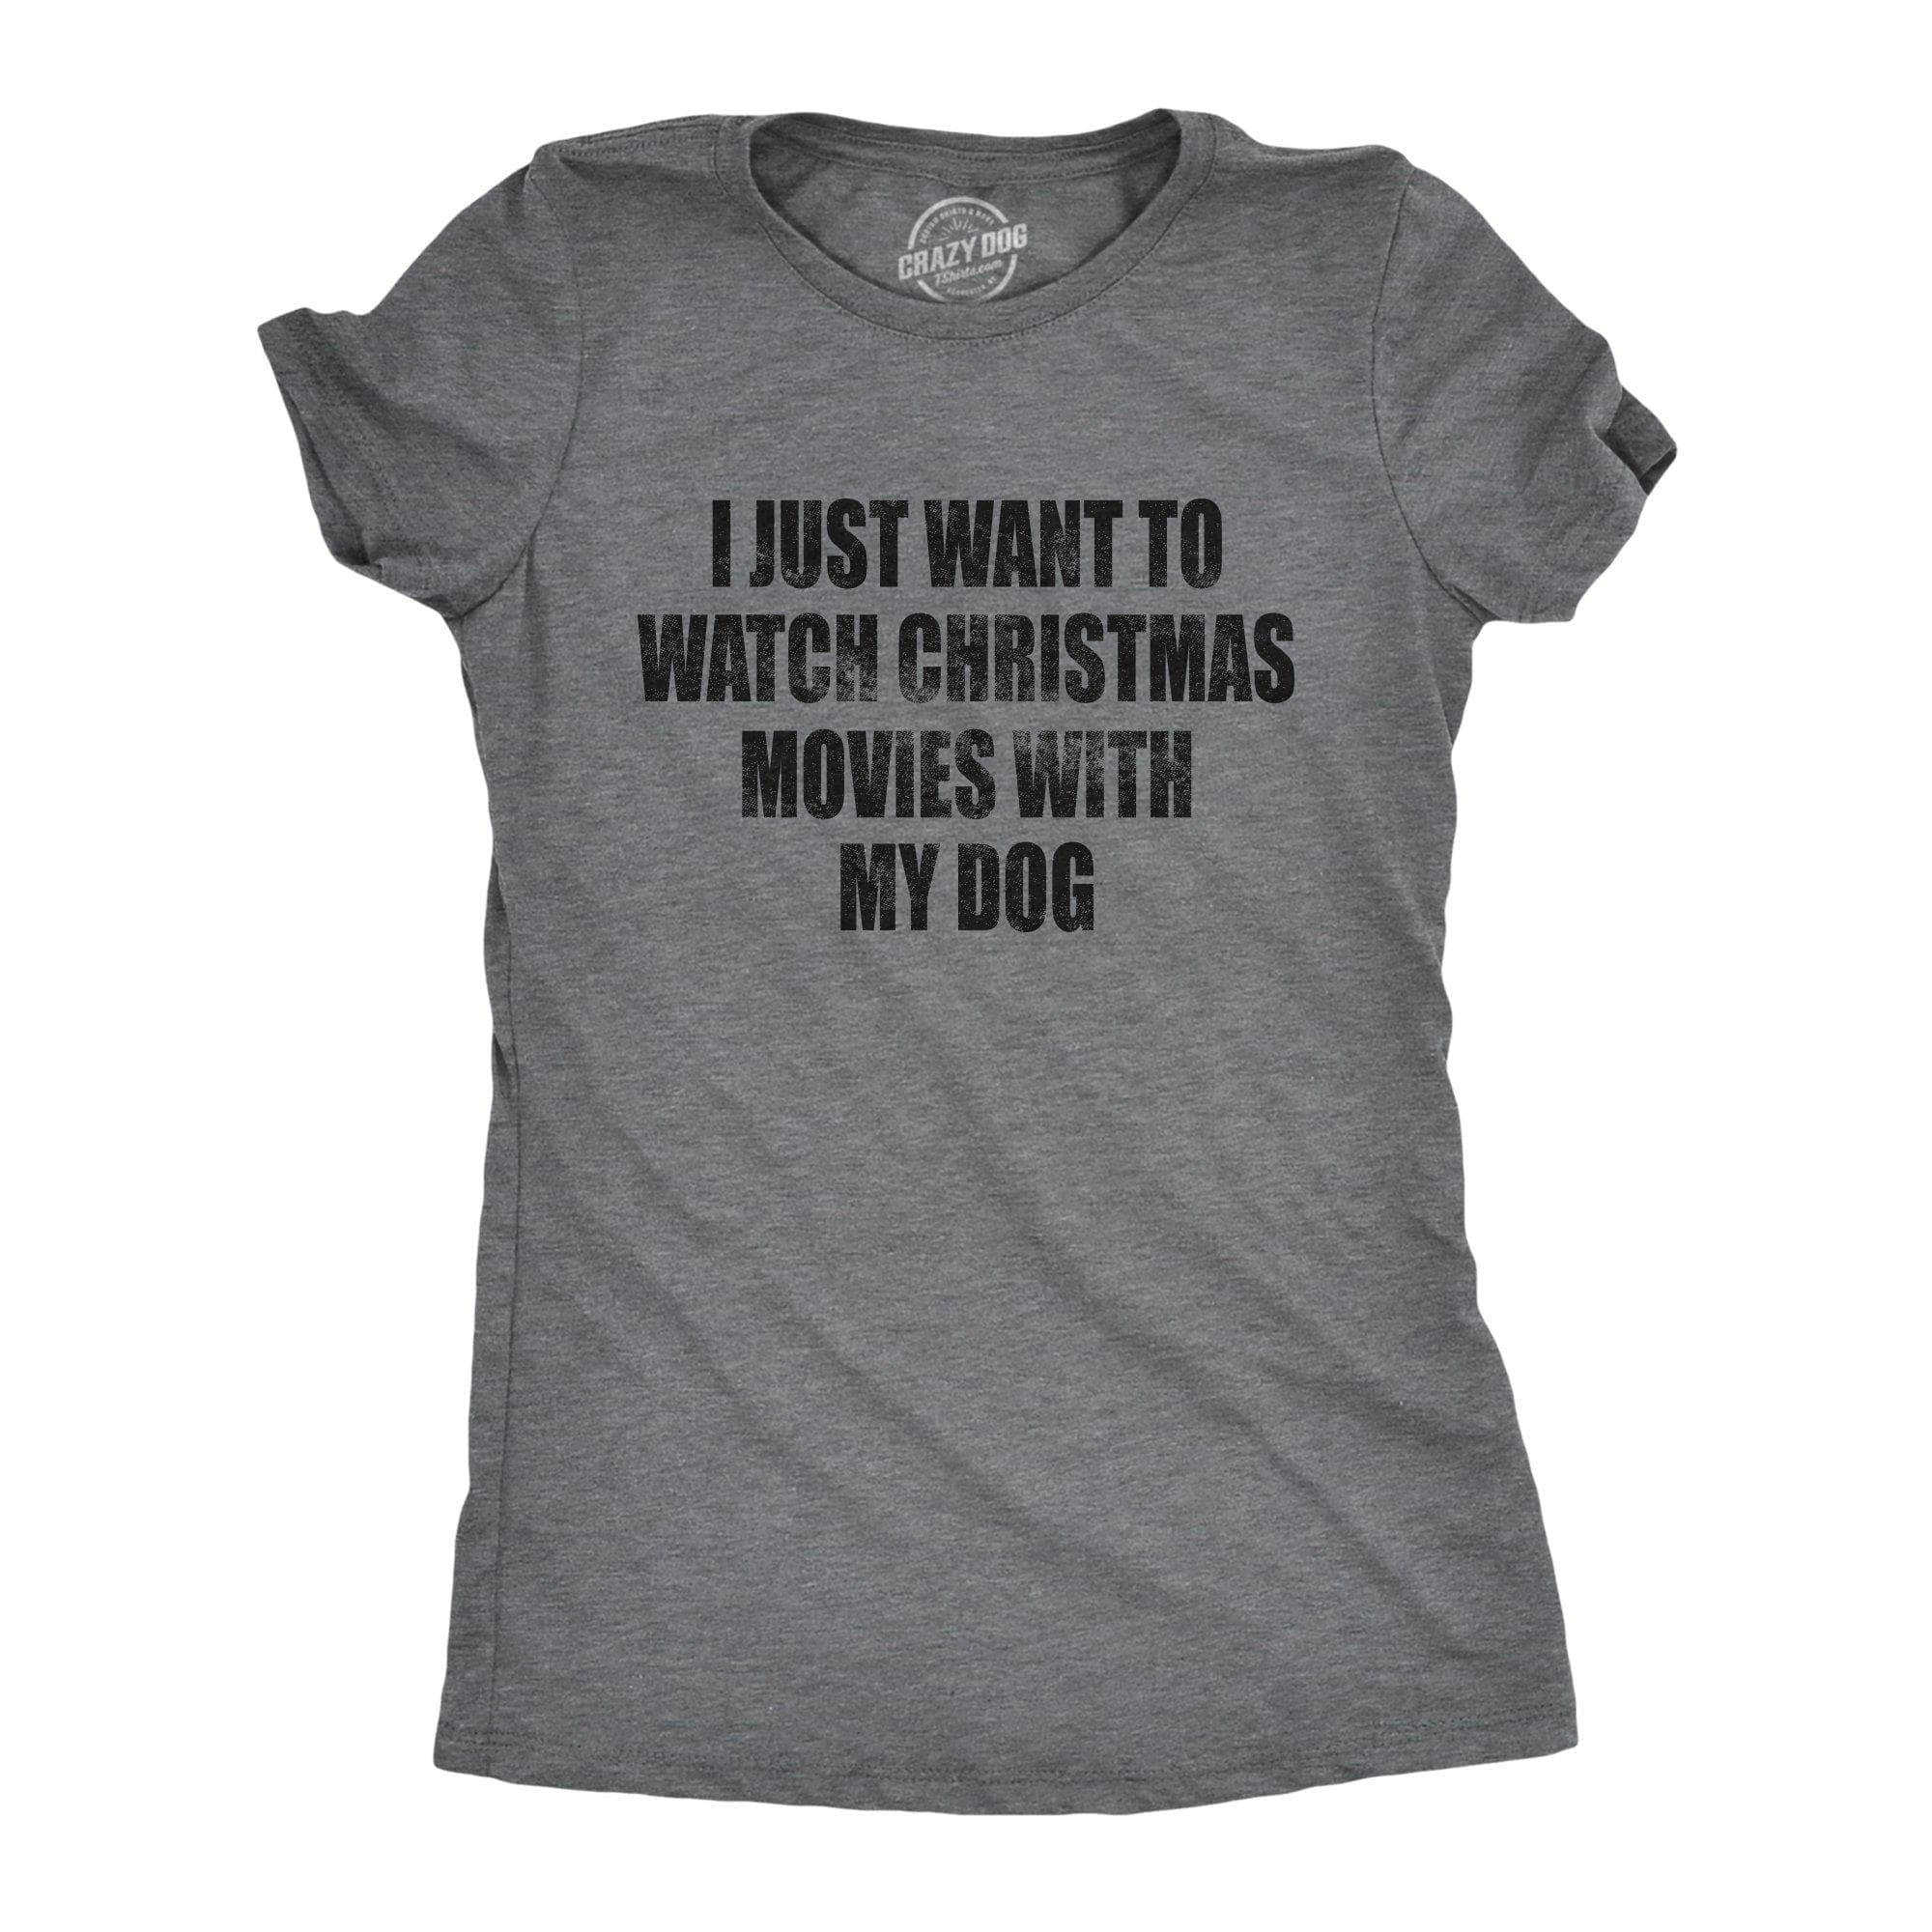 I Just Want To Watch Christmas Movies With My Dog Women's Tshirt - Crazy Dog T-Shirts